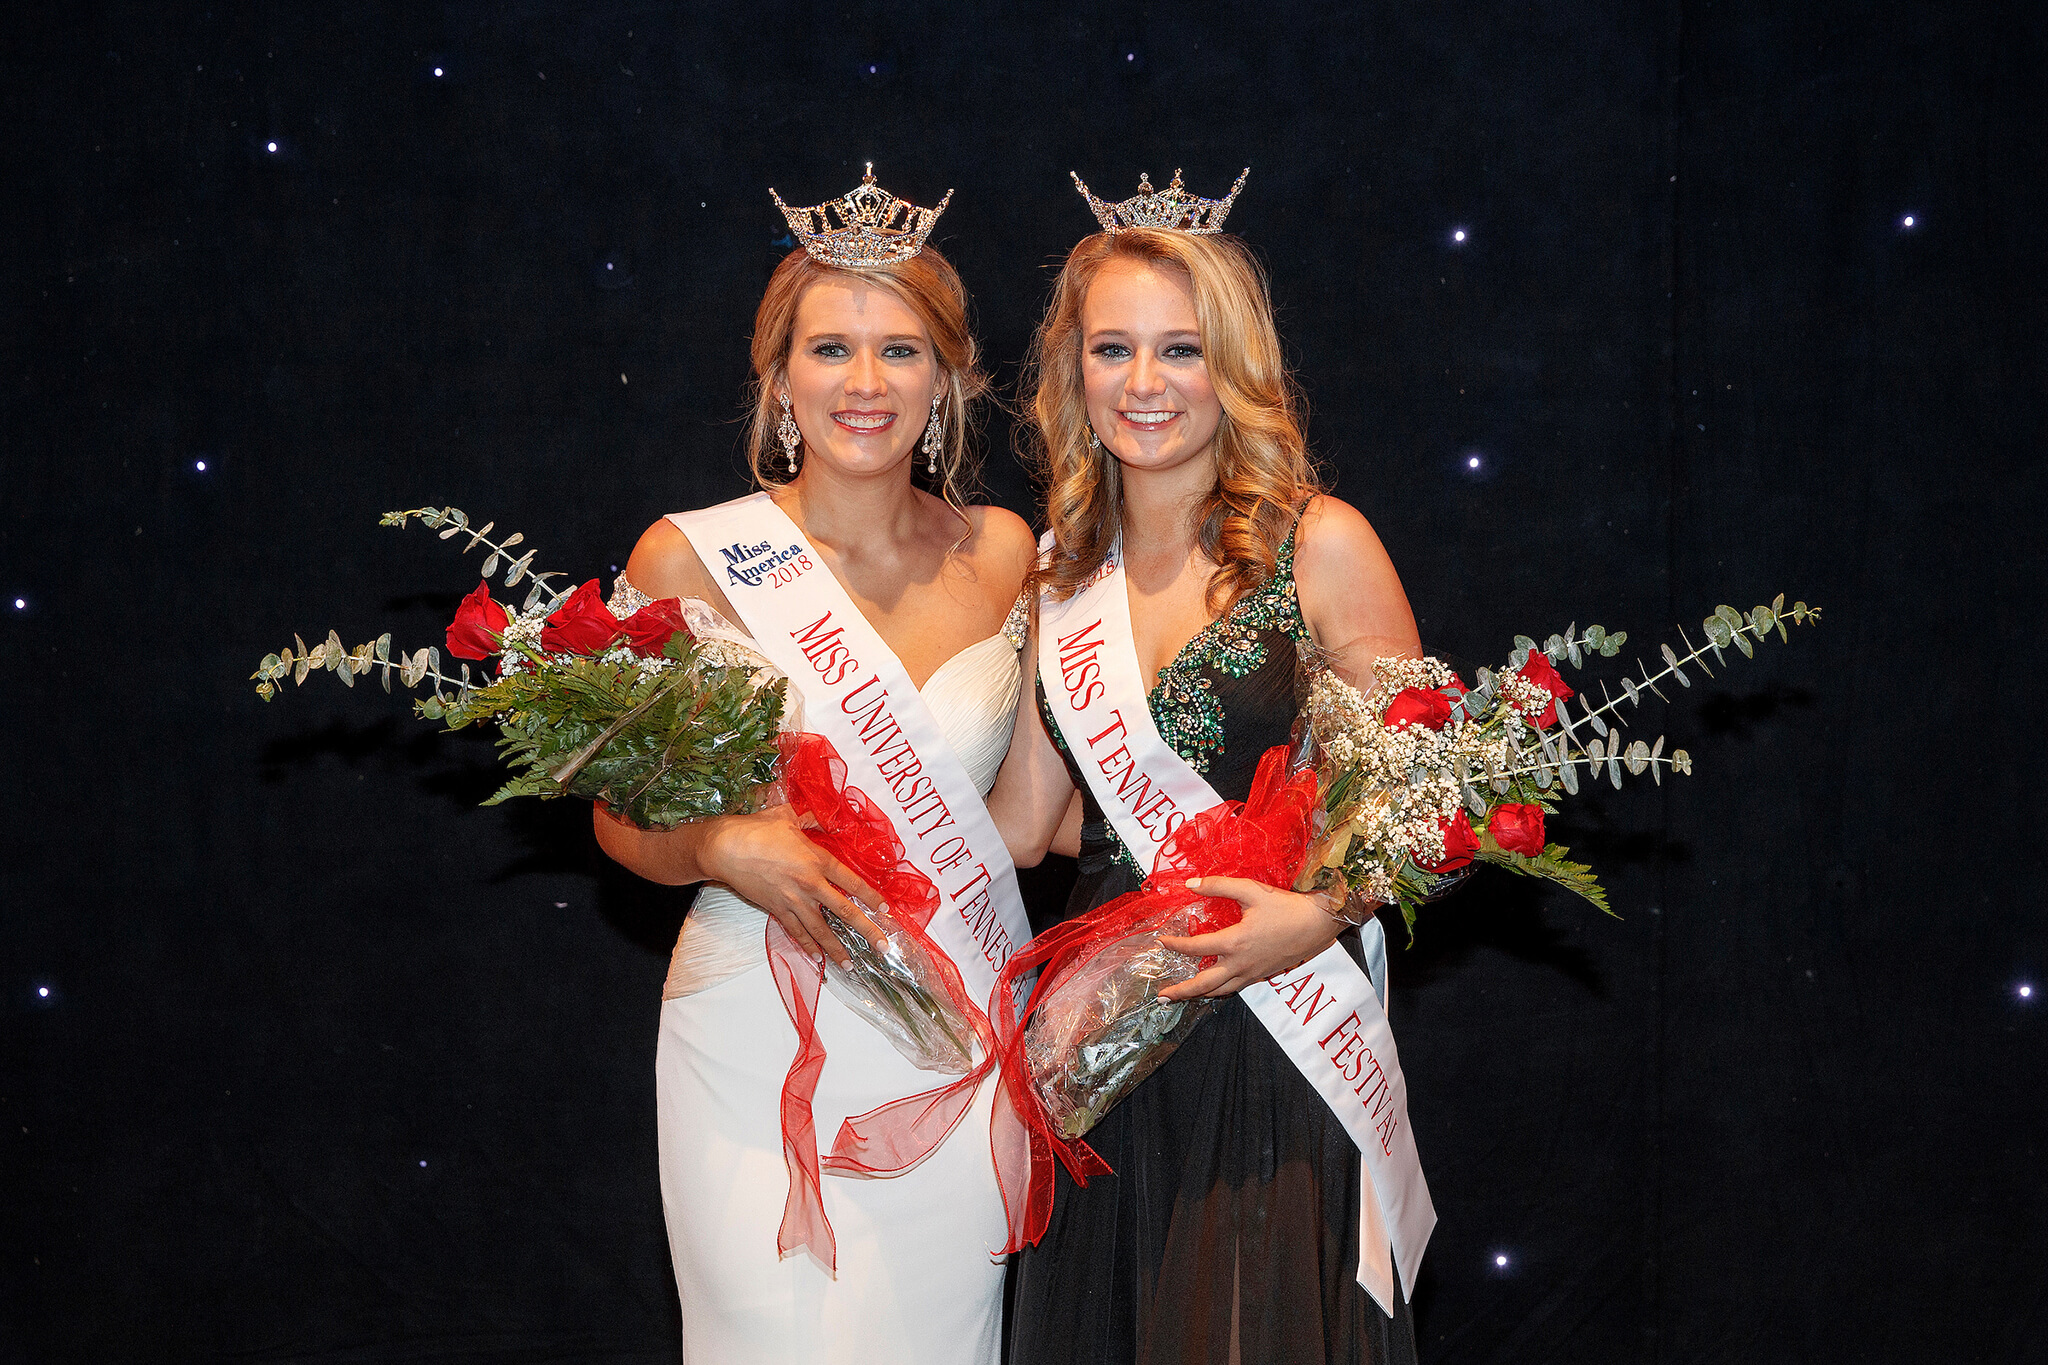 Morgan Martin (left), of Union City, and Katie Hodges, of Henderson, claimed the Miss UT Martin and Miss Tennessee Soybean Festival titles, respectively, during the combined pageant Nov. 11, 2017, at the University of Tennessee at Martin.